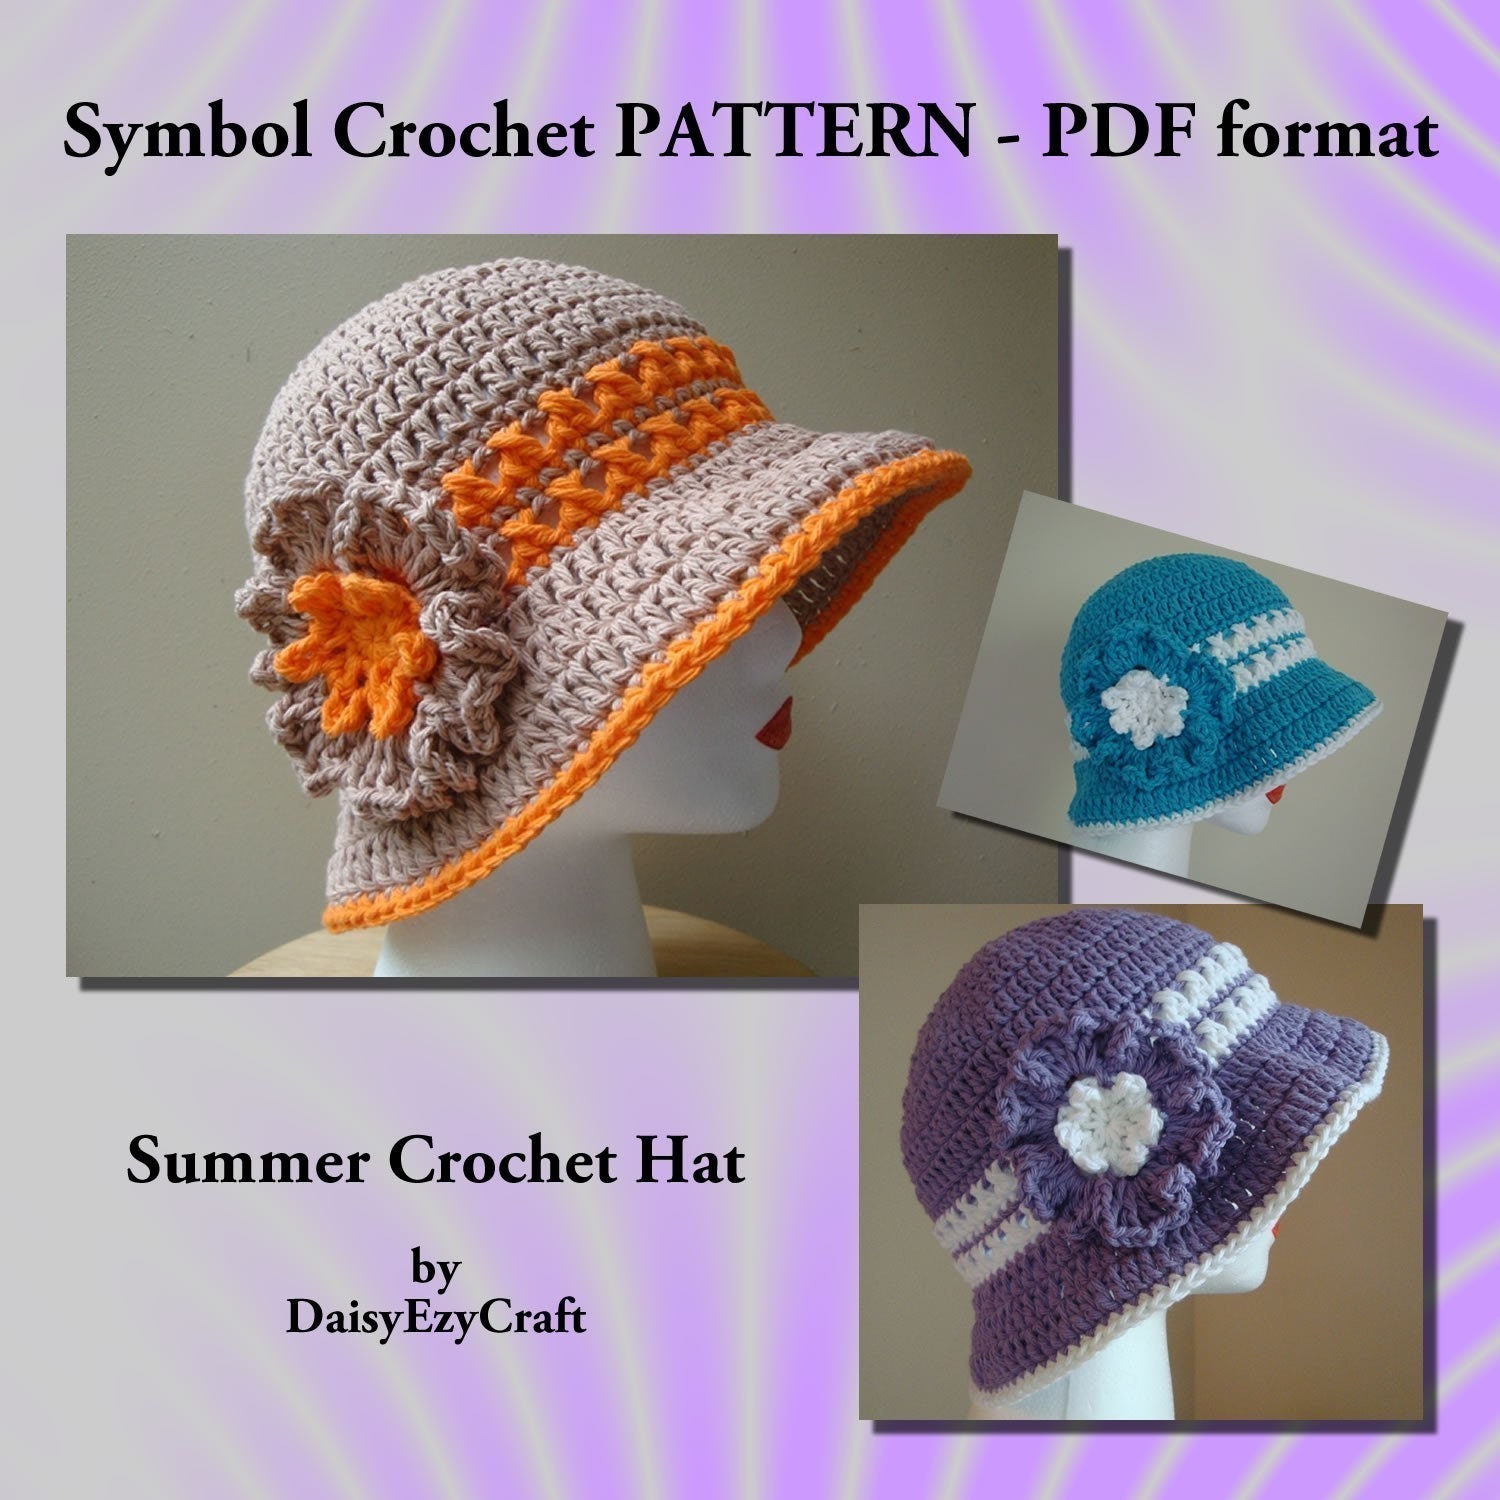 HALFKNITS CHARITY KNITTING AND CROCHET GROUP - HAT PATTERNS